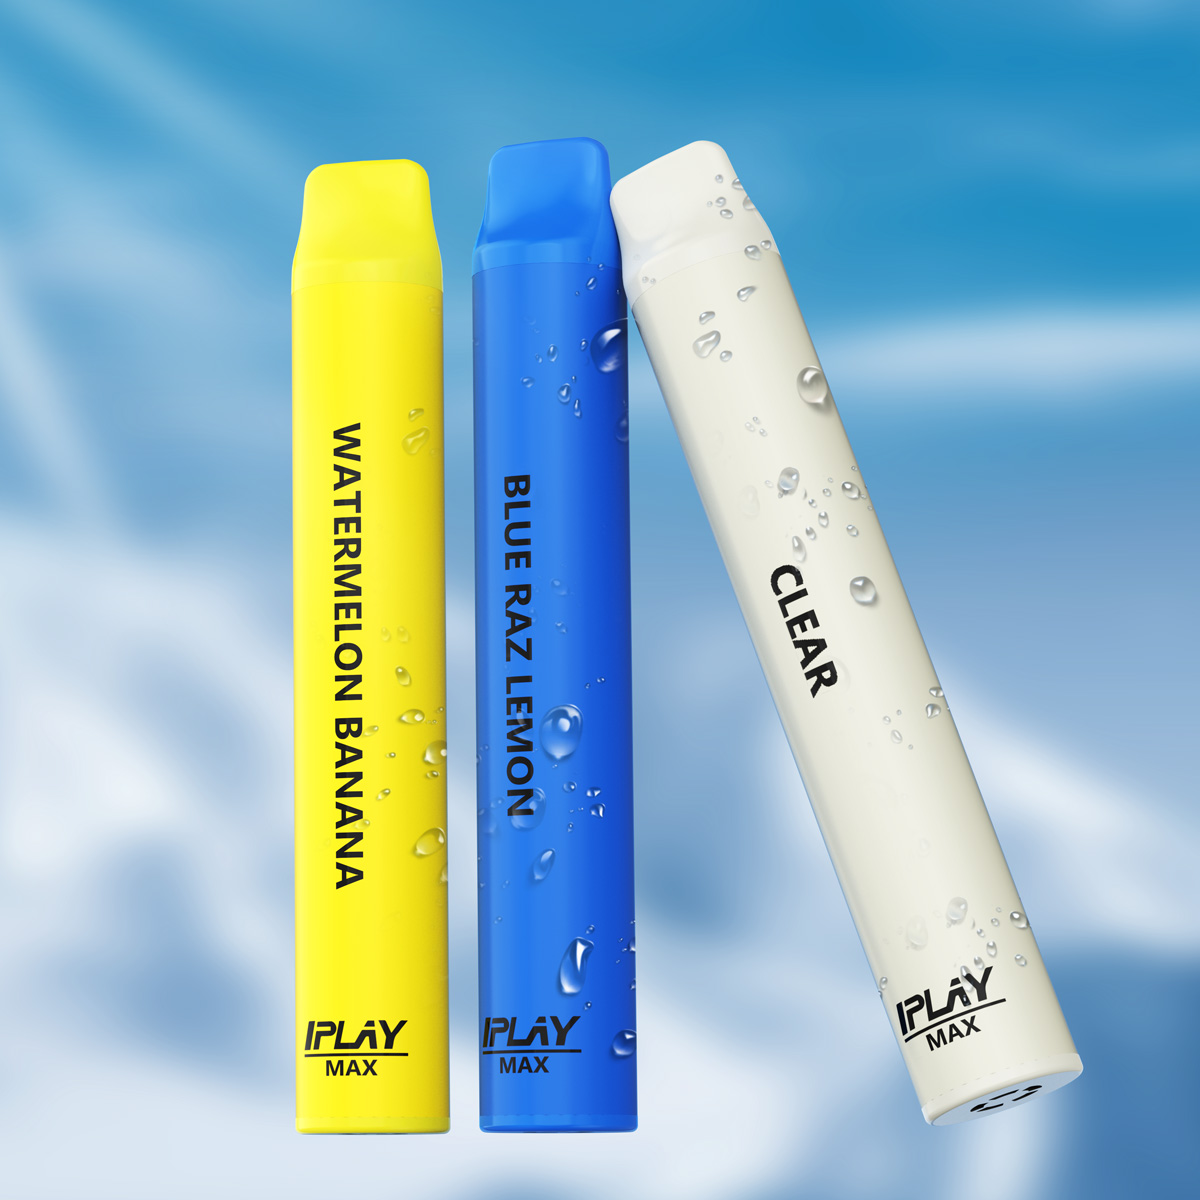 IPLAY MAX 2500 Puffs Disposable Vape Pod Featured Image